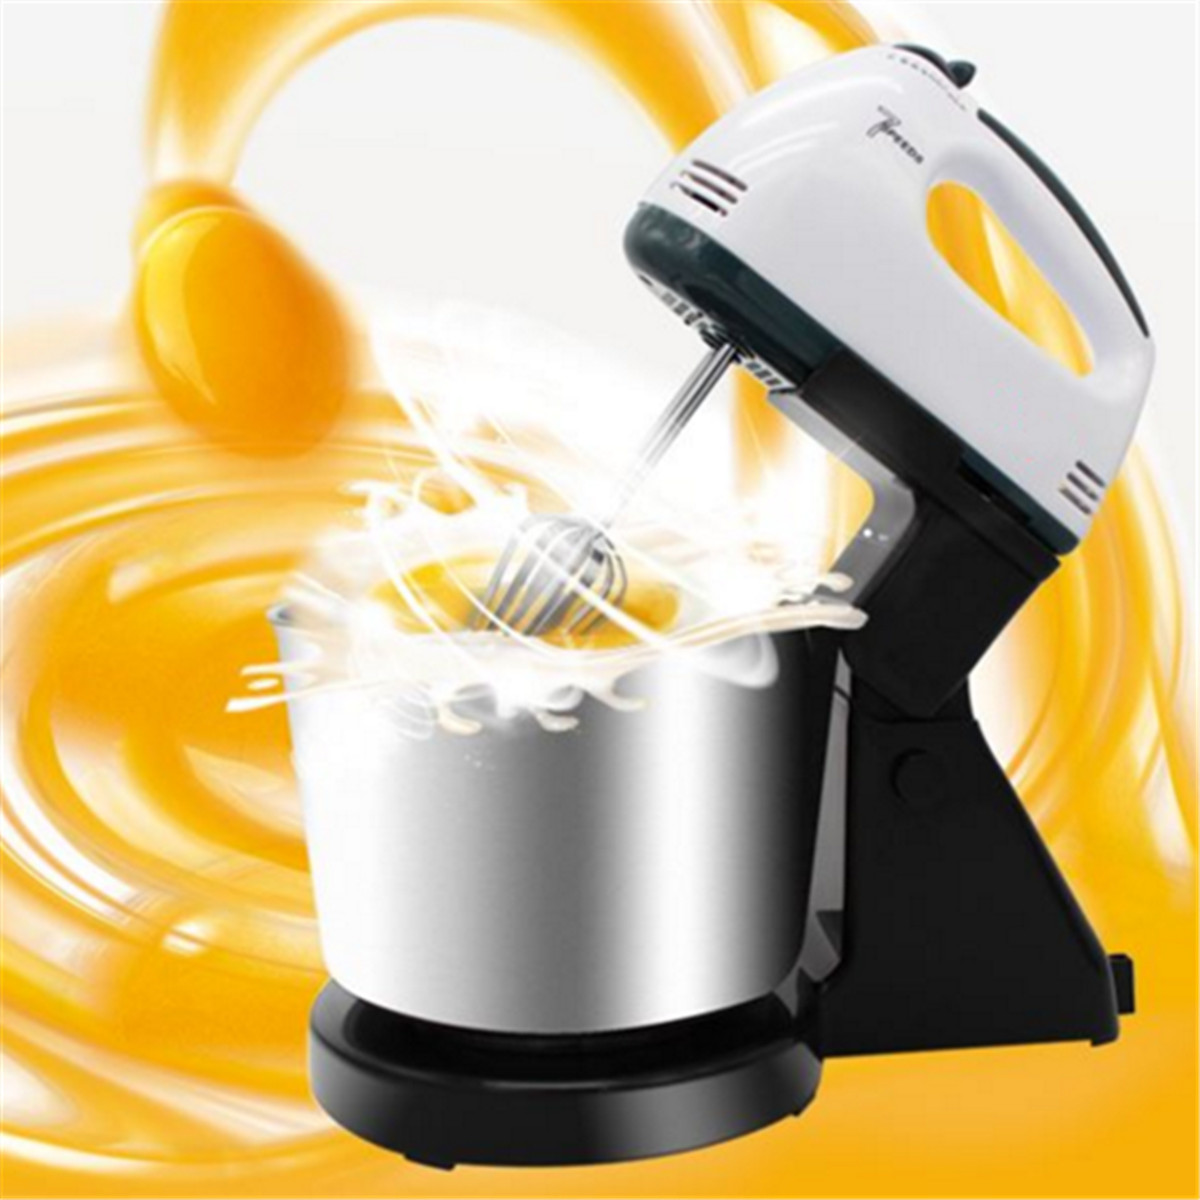 7 Speed Electric Egg Beater Dough Cakes Bread Egg Stand Mixer + Hand Blender + Bowl Food Mixer Kitchen Accessories Egg Tools 43